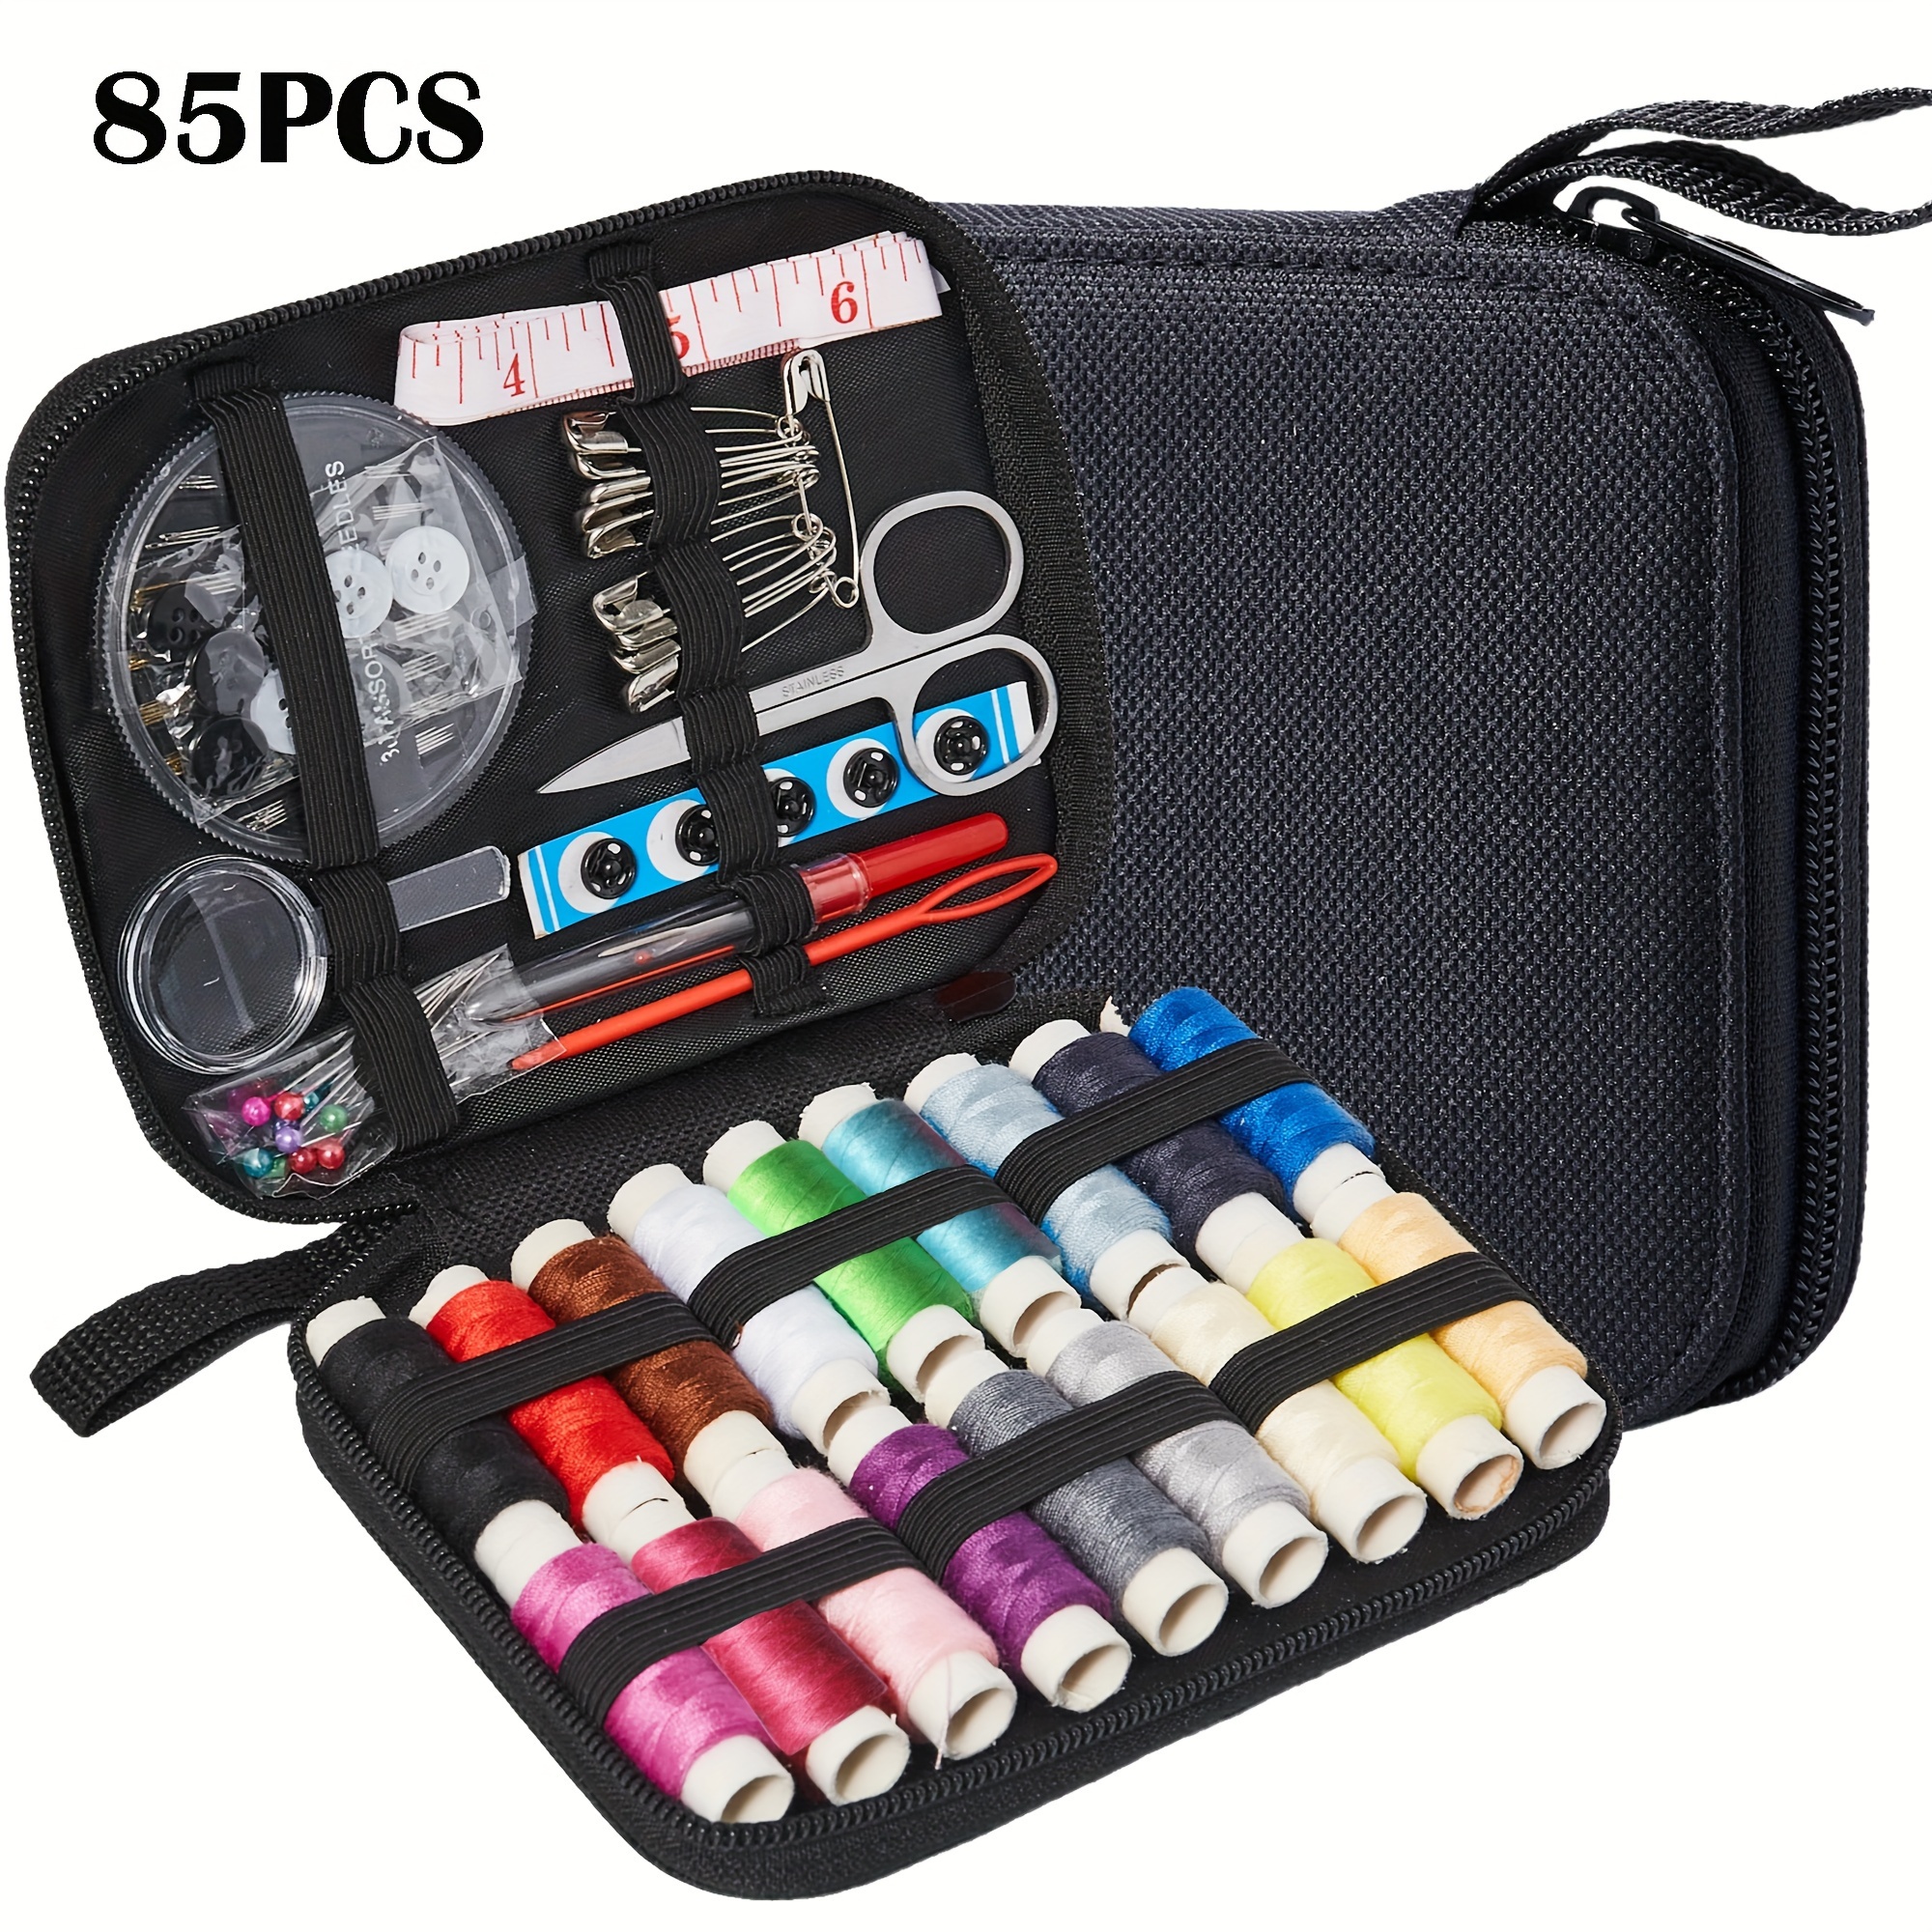 

85-piece Travel Sewing Kit With Case - Complete Portable Mending Supplies For Beginners, Includes Thread, Needles, Scissors & More - Ideal Gift For Grandma, Mom, Friends